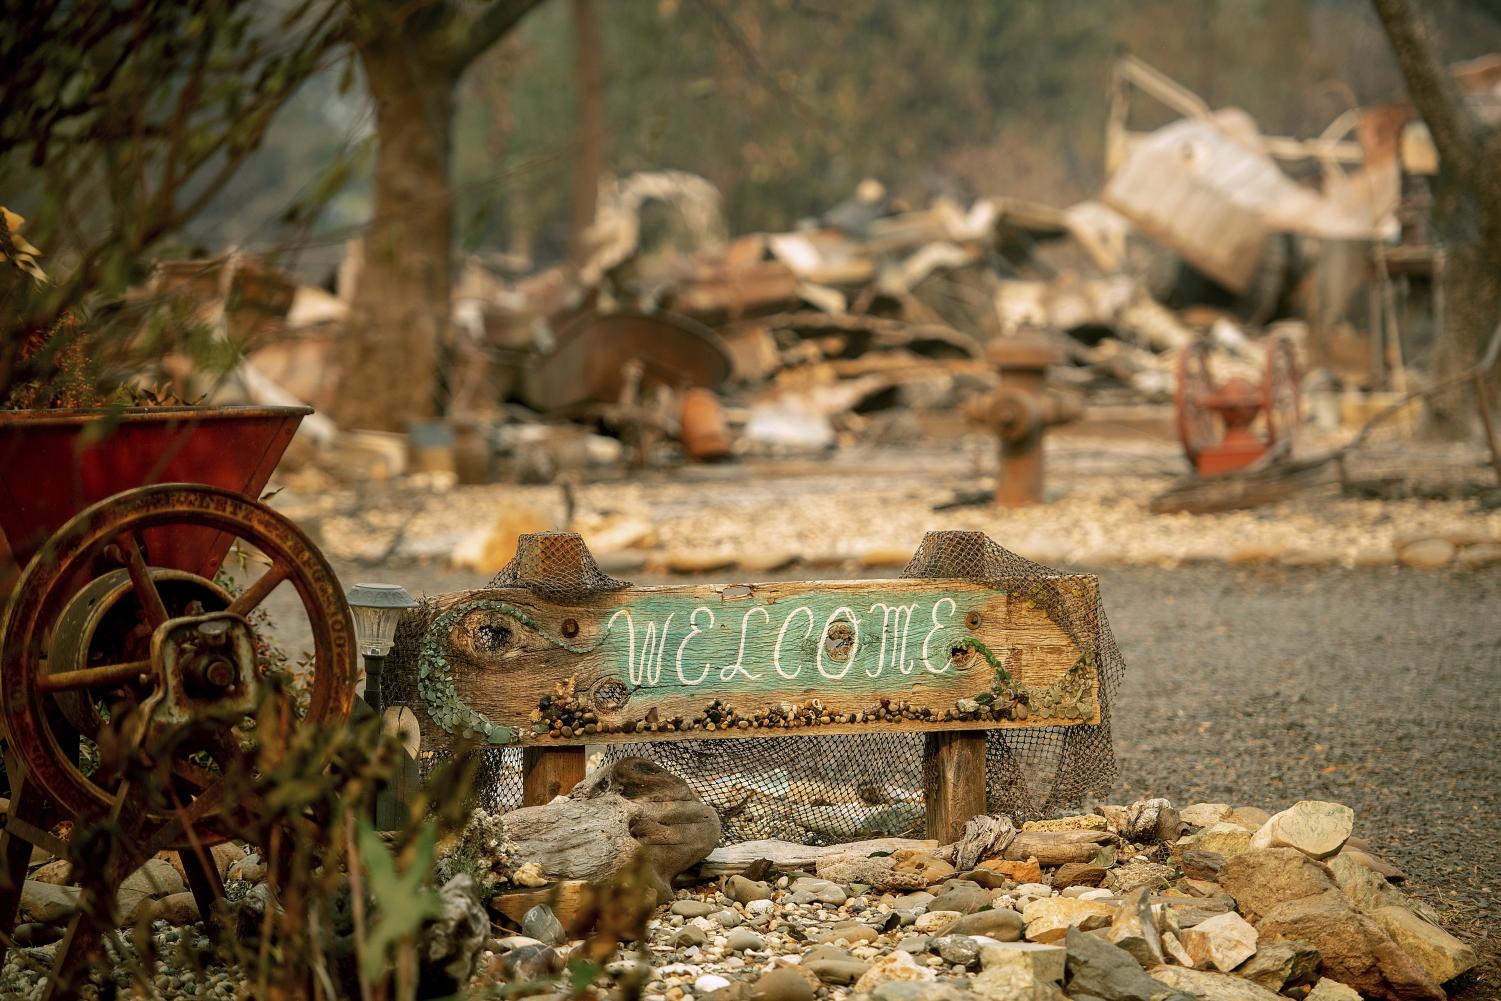 California+wildfire+has+killed+79%2C+rain+is+helming+squelch+fires+but+mudslides+present+recovery+problems